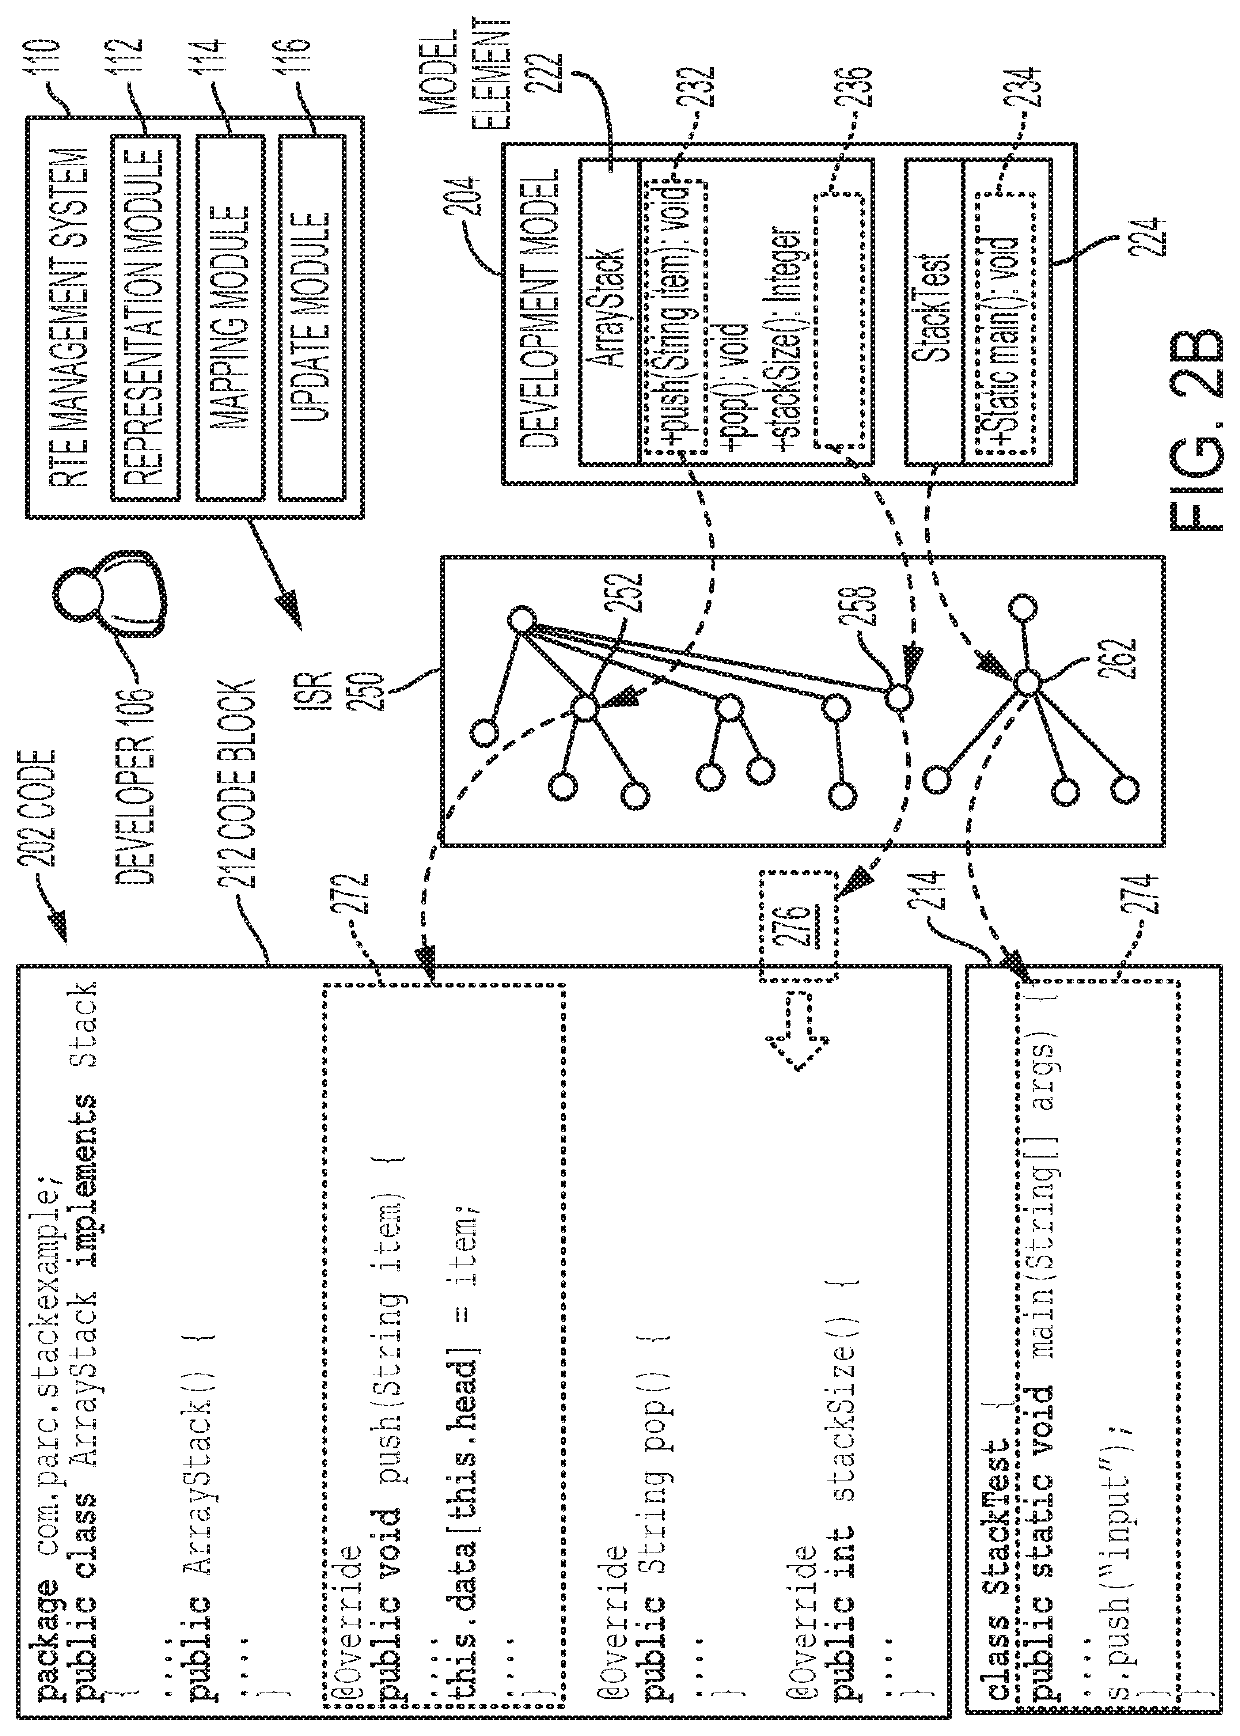 System and method for facilitating efficient round-trip engineering using intermediate representations